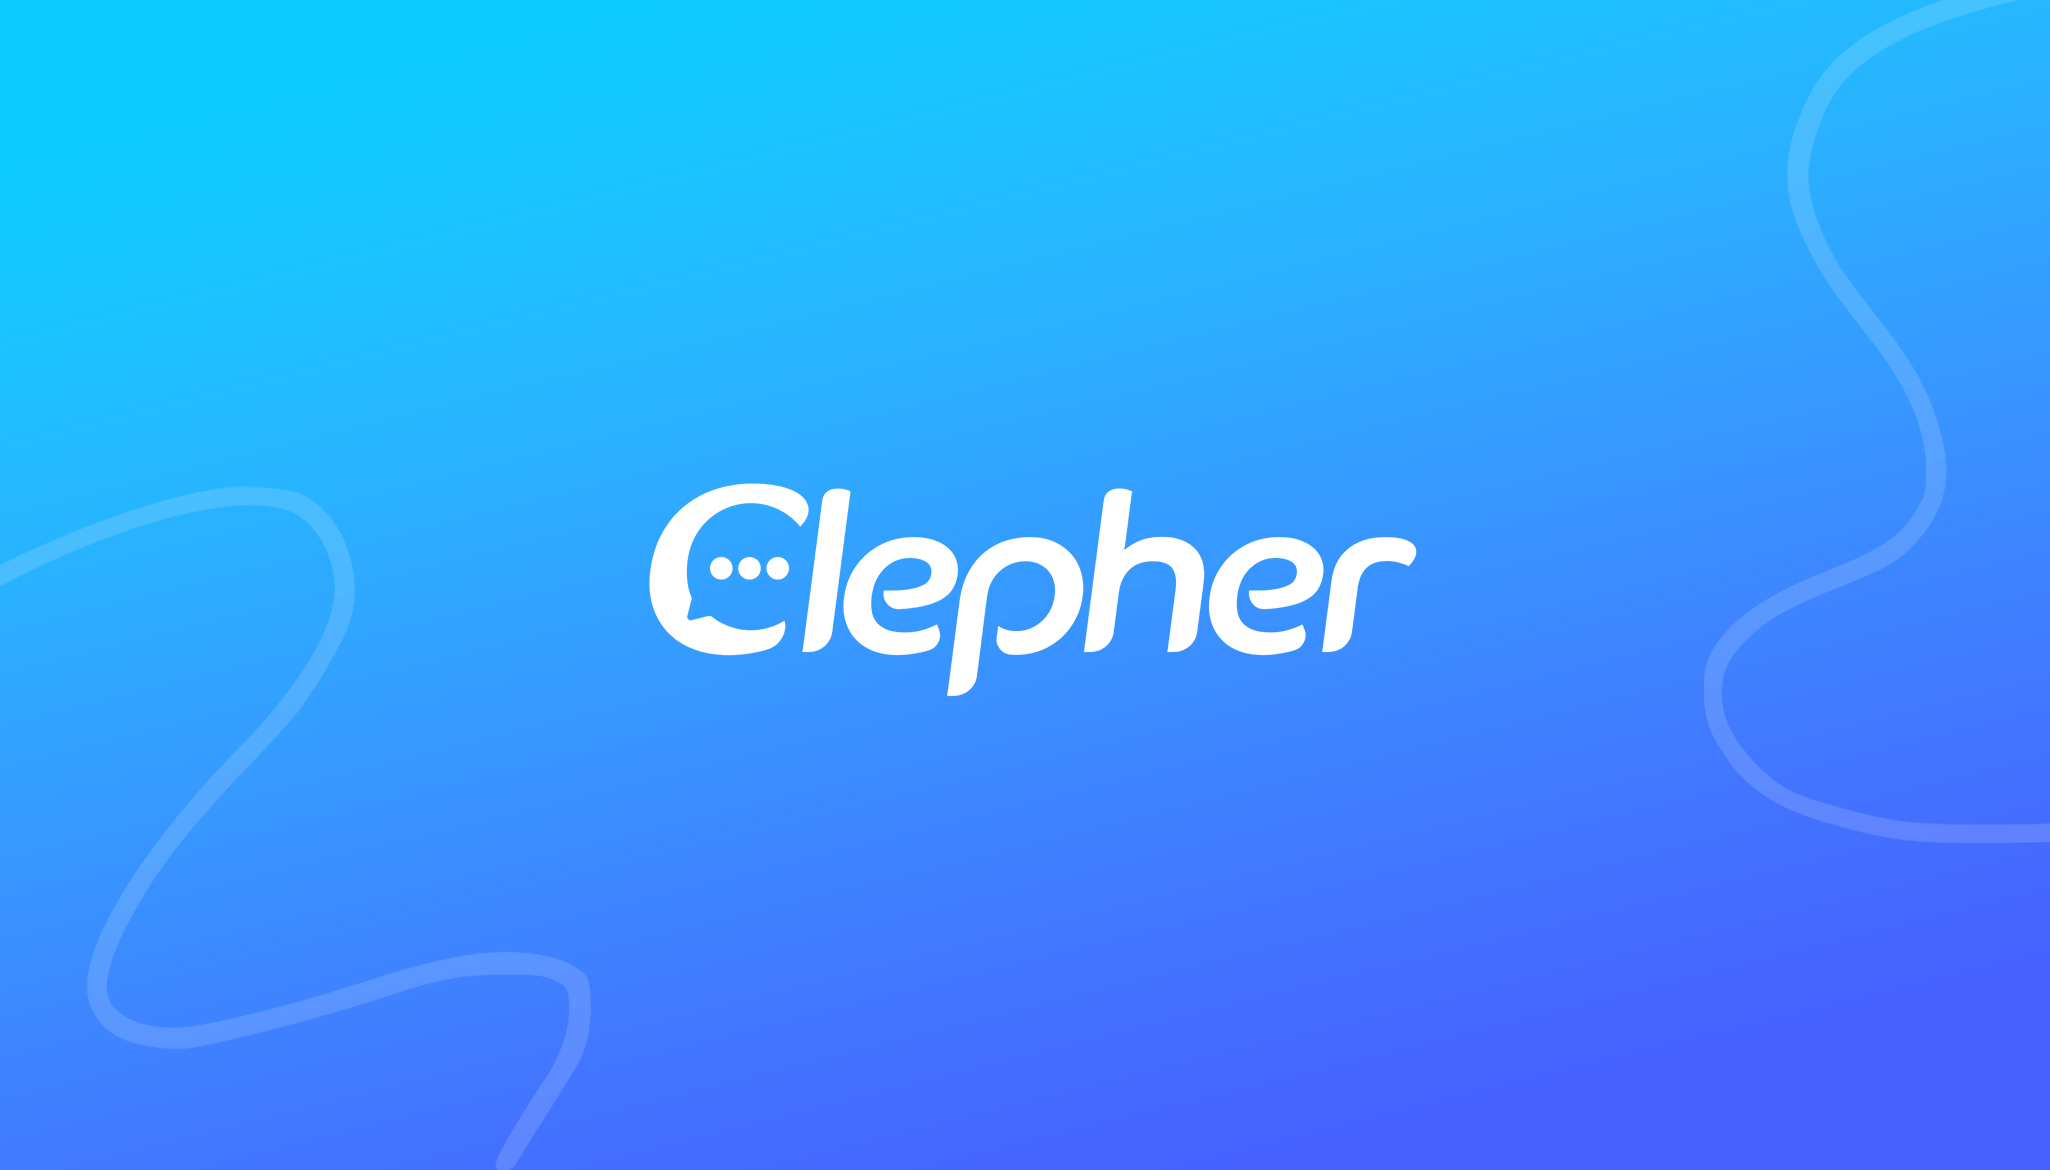 Use Clepher with your Instagram live chats.